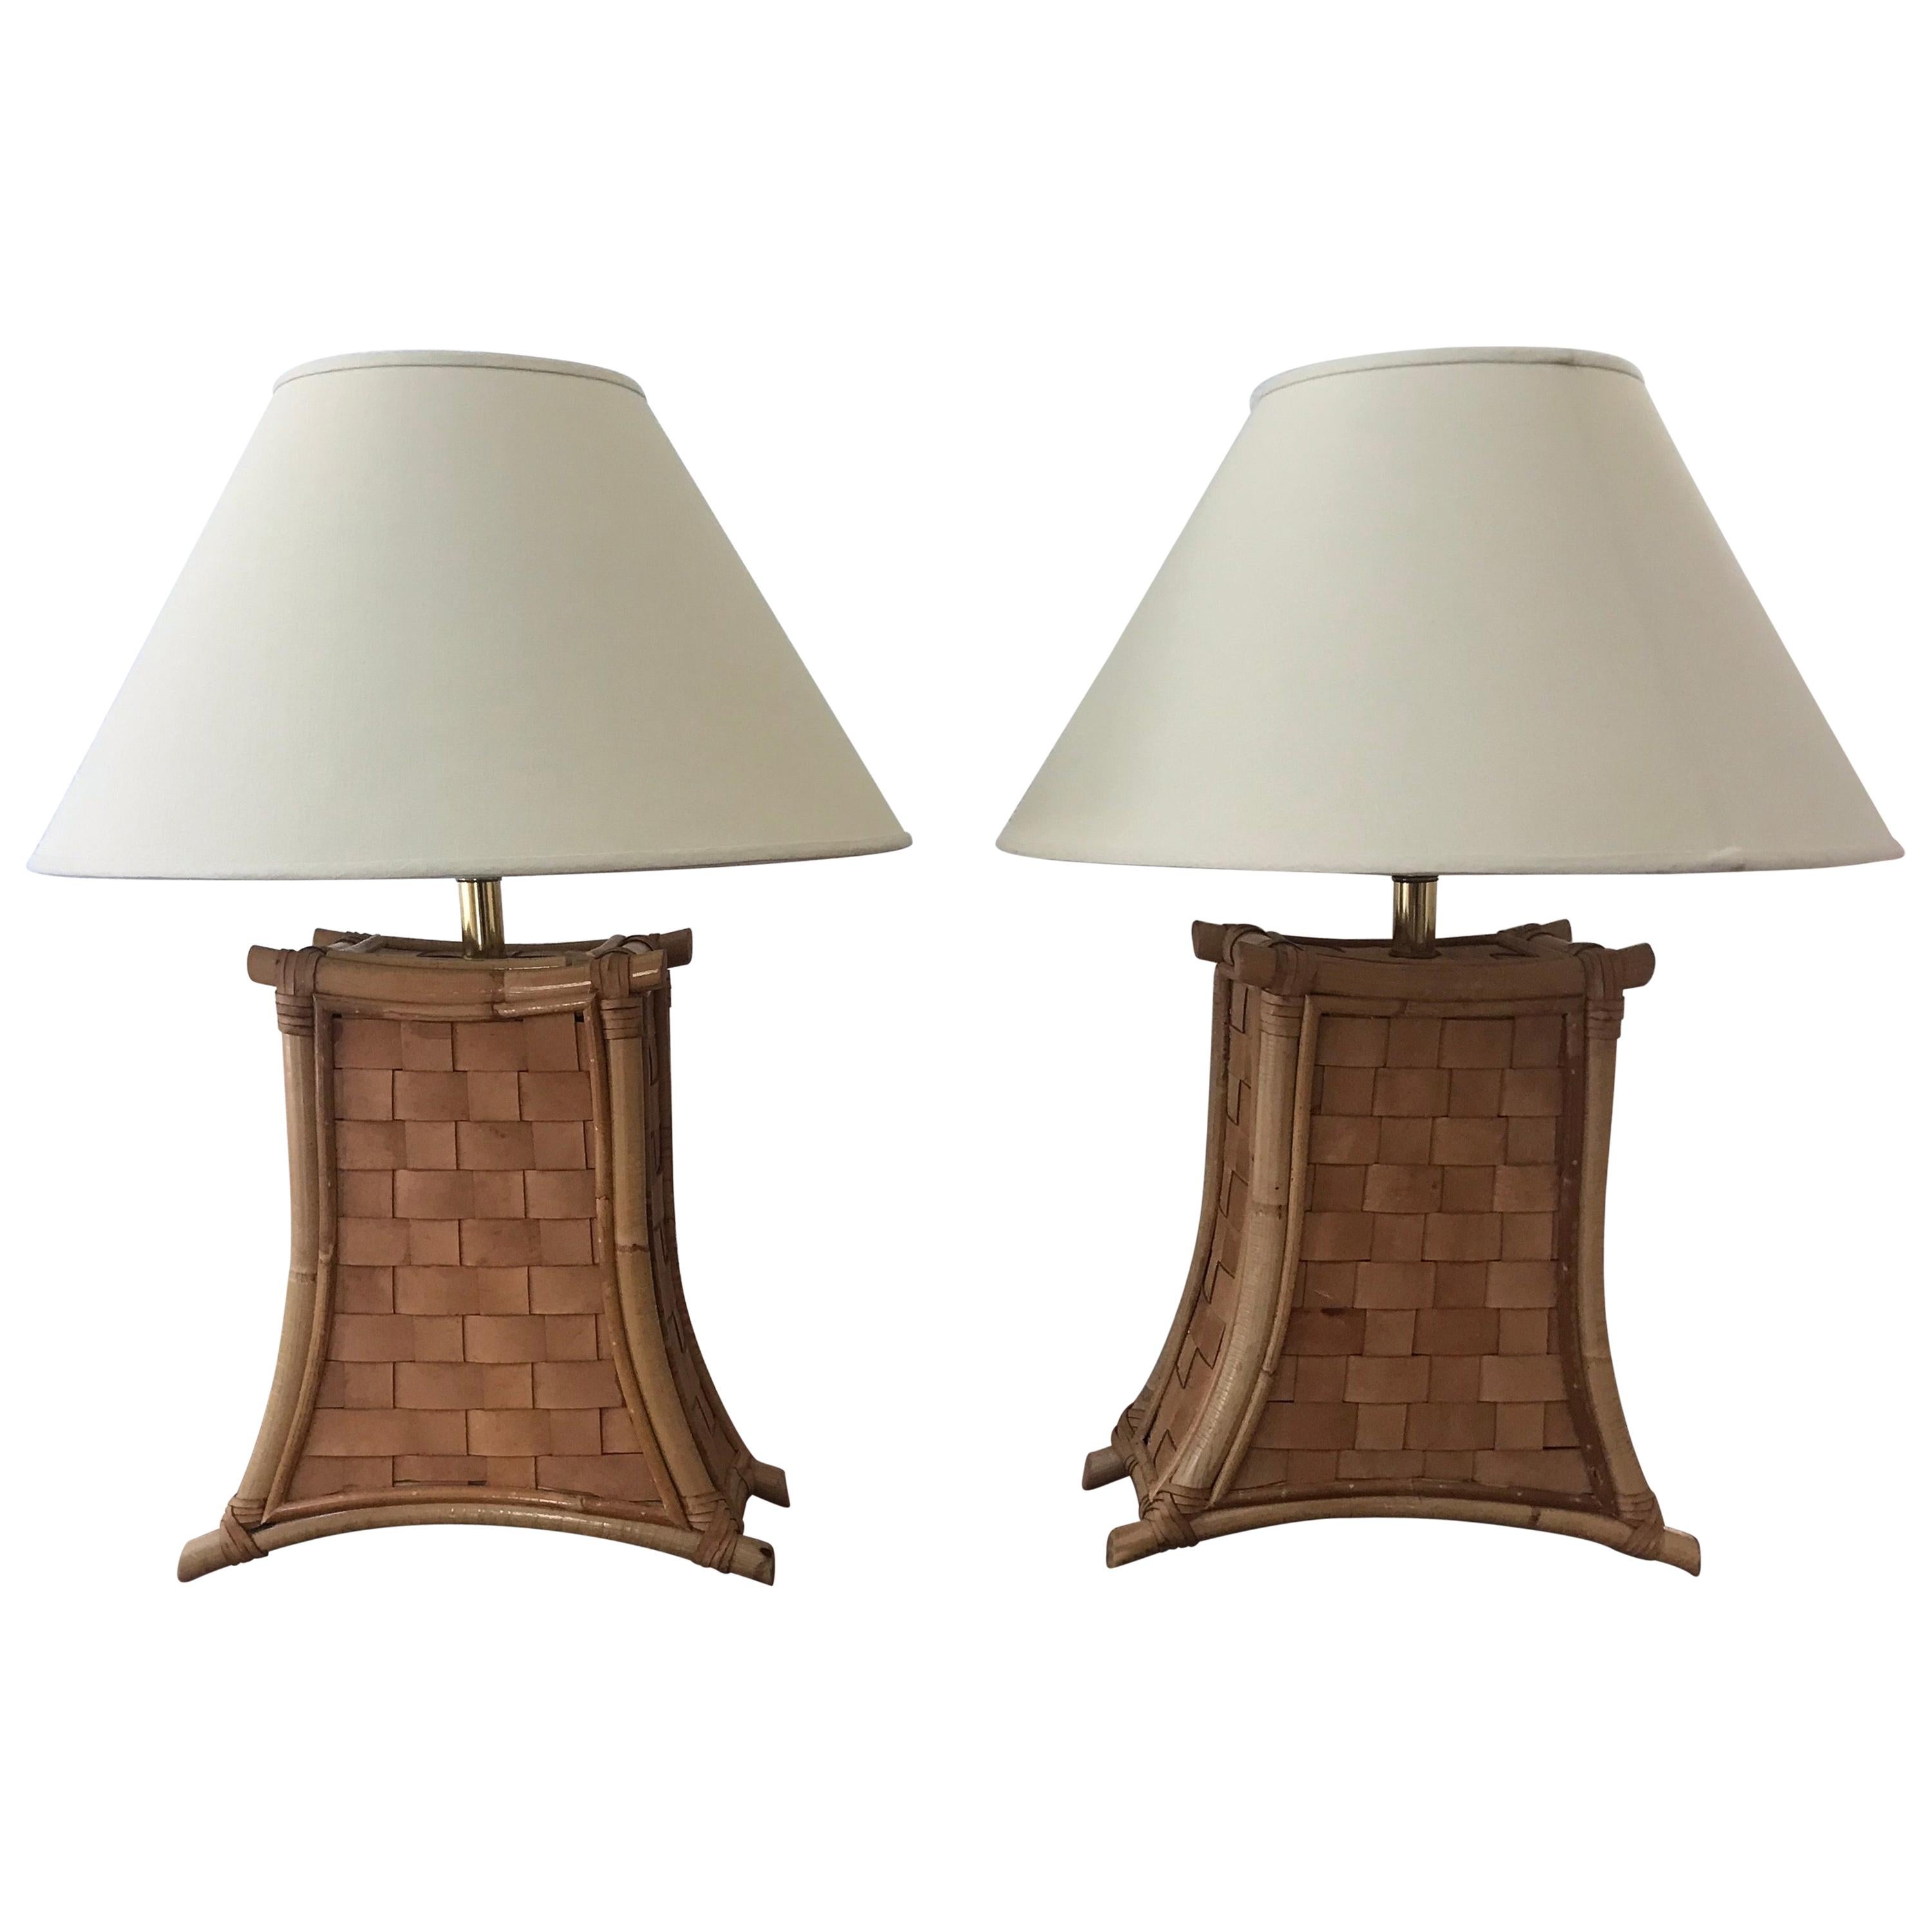 Bamboo and Leather Strap Lamps